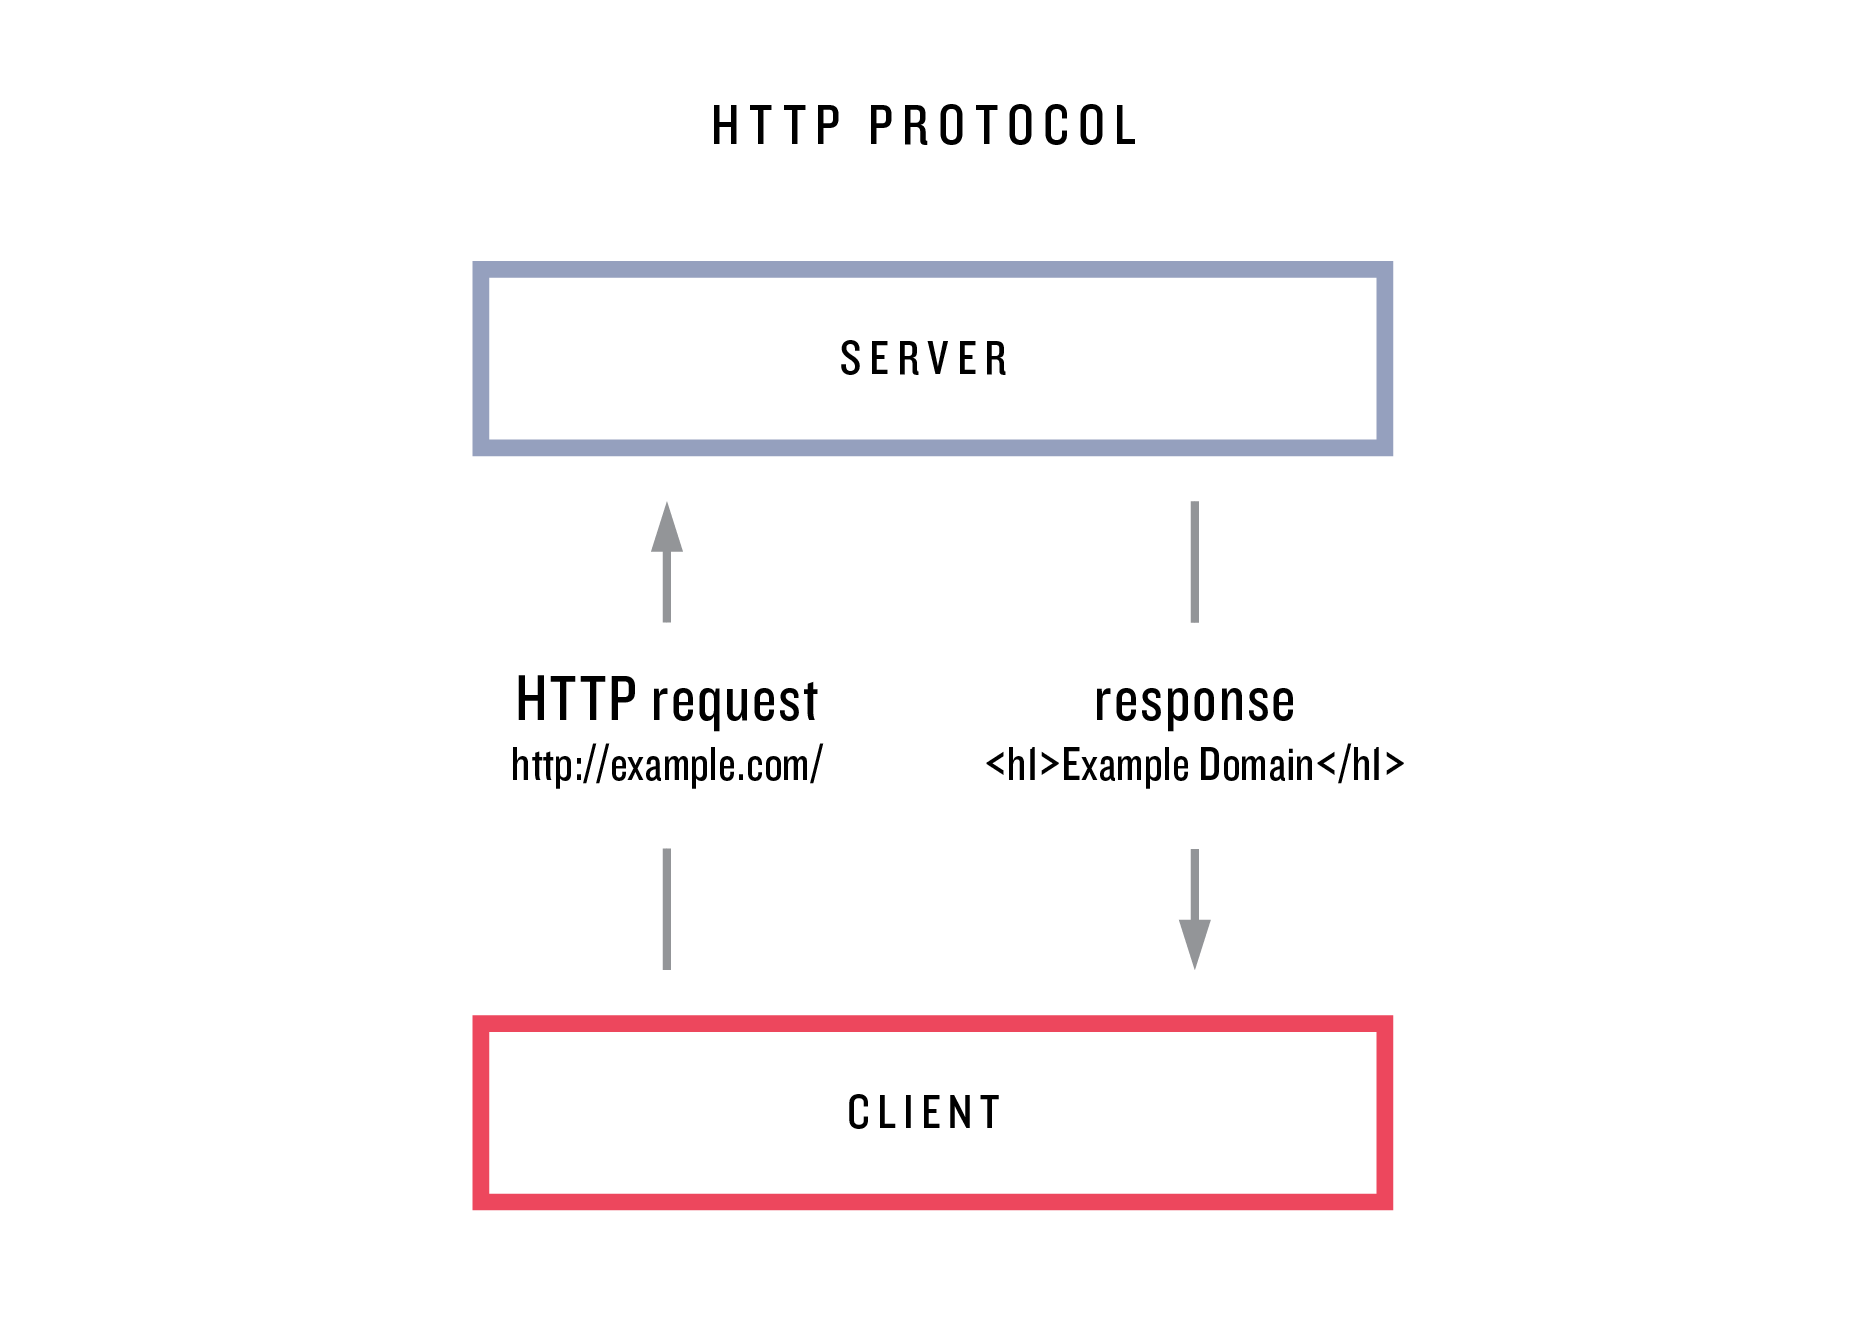 images/figures/http_protocol